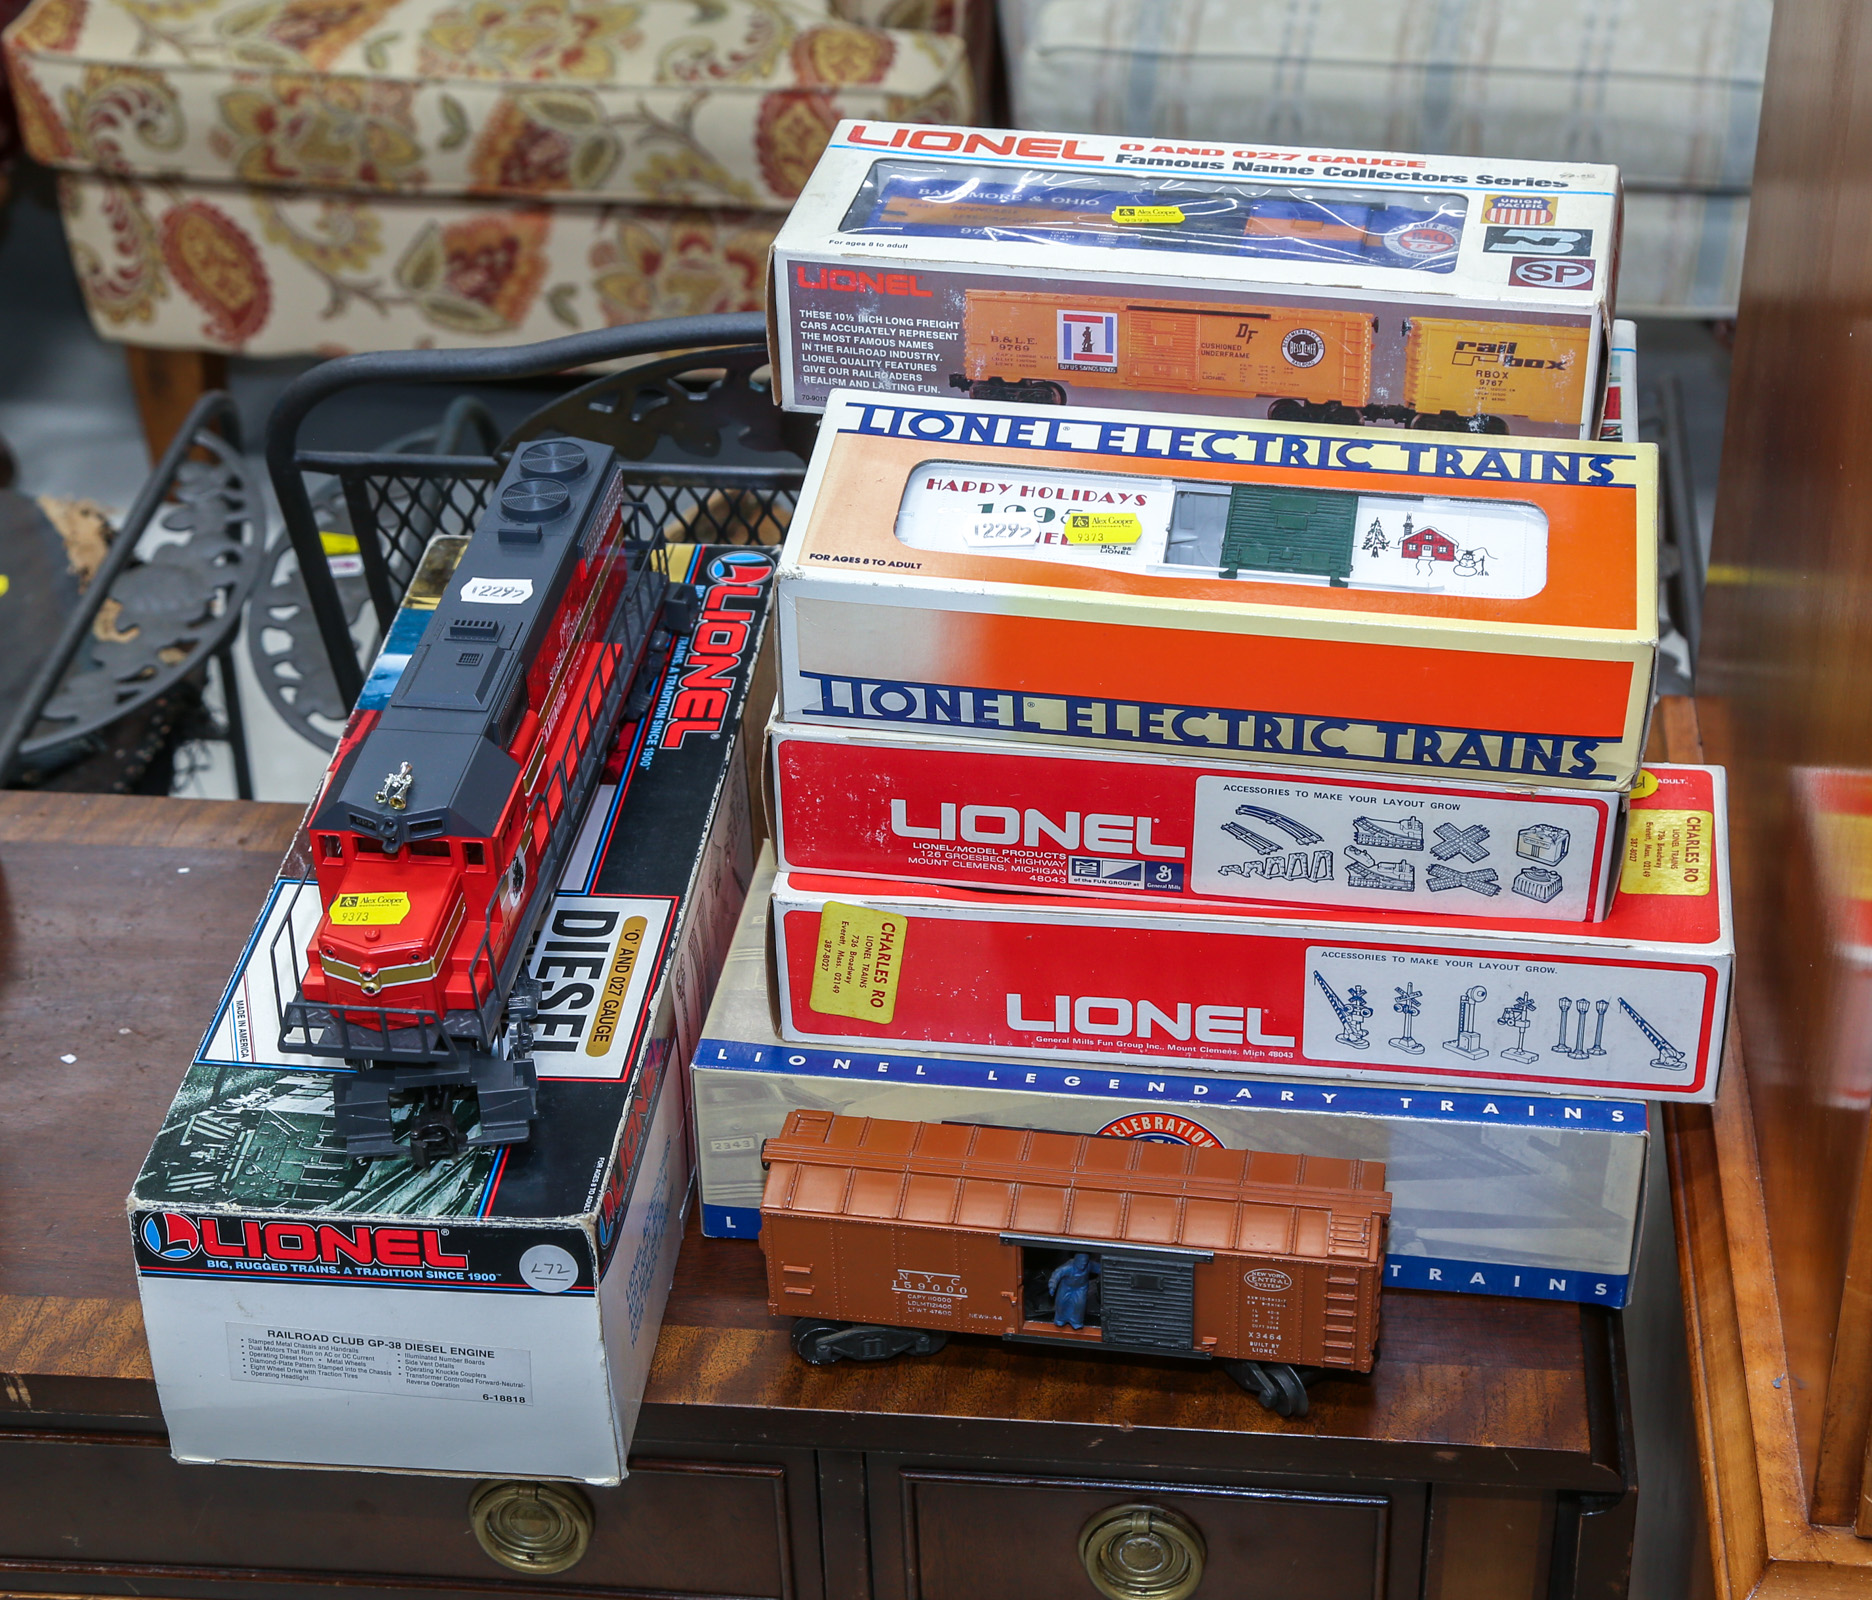 10 LIONEL TRAIN CARS With Lionel